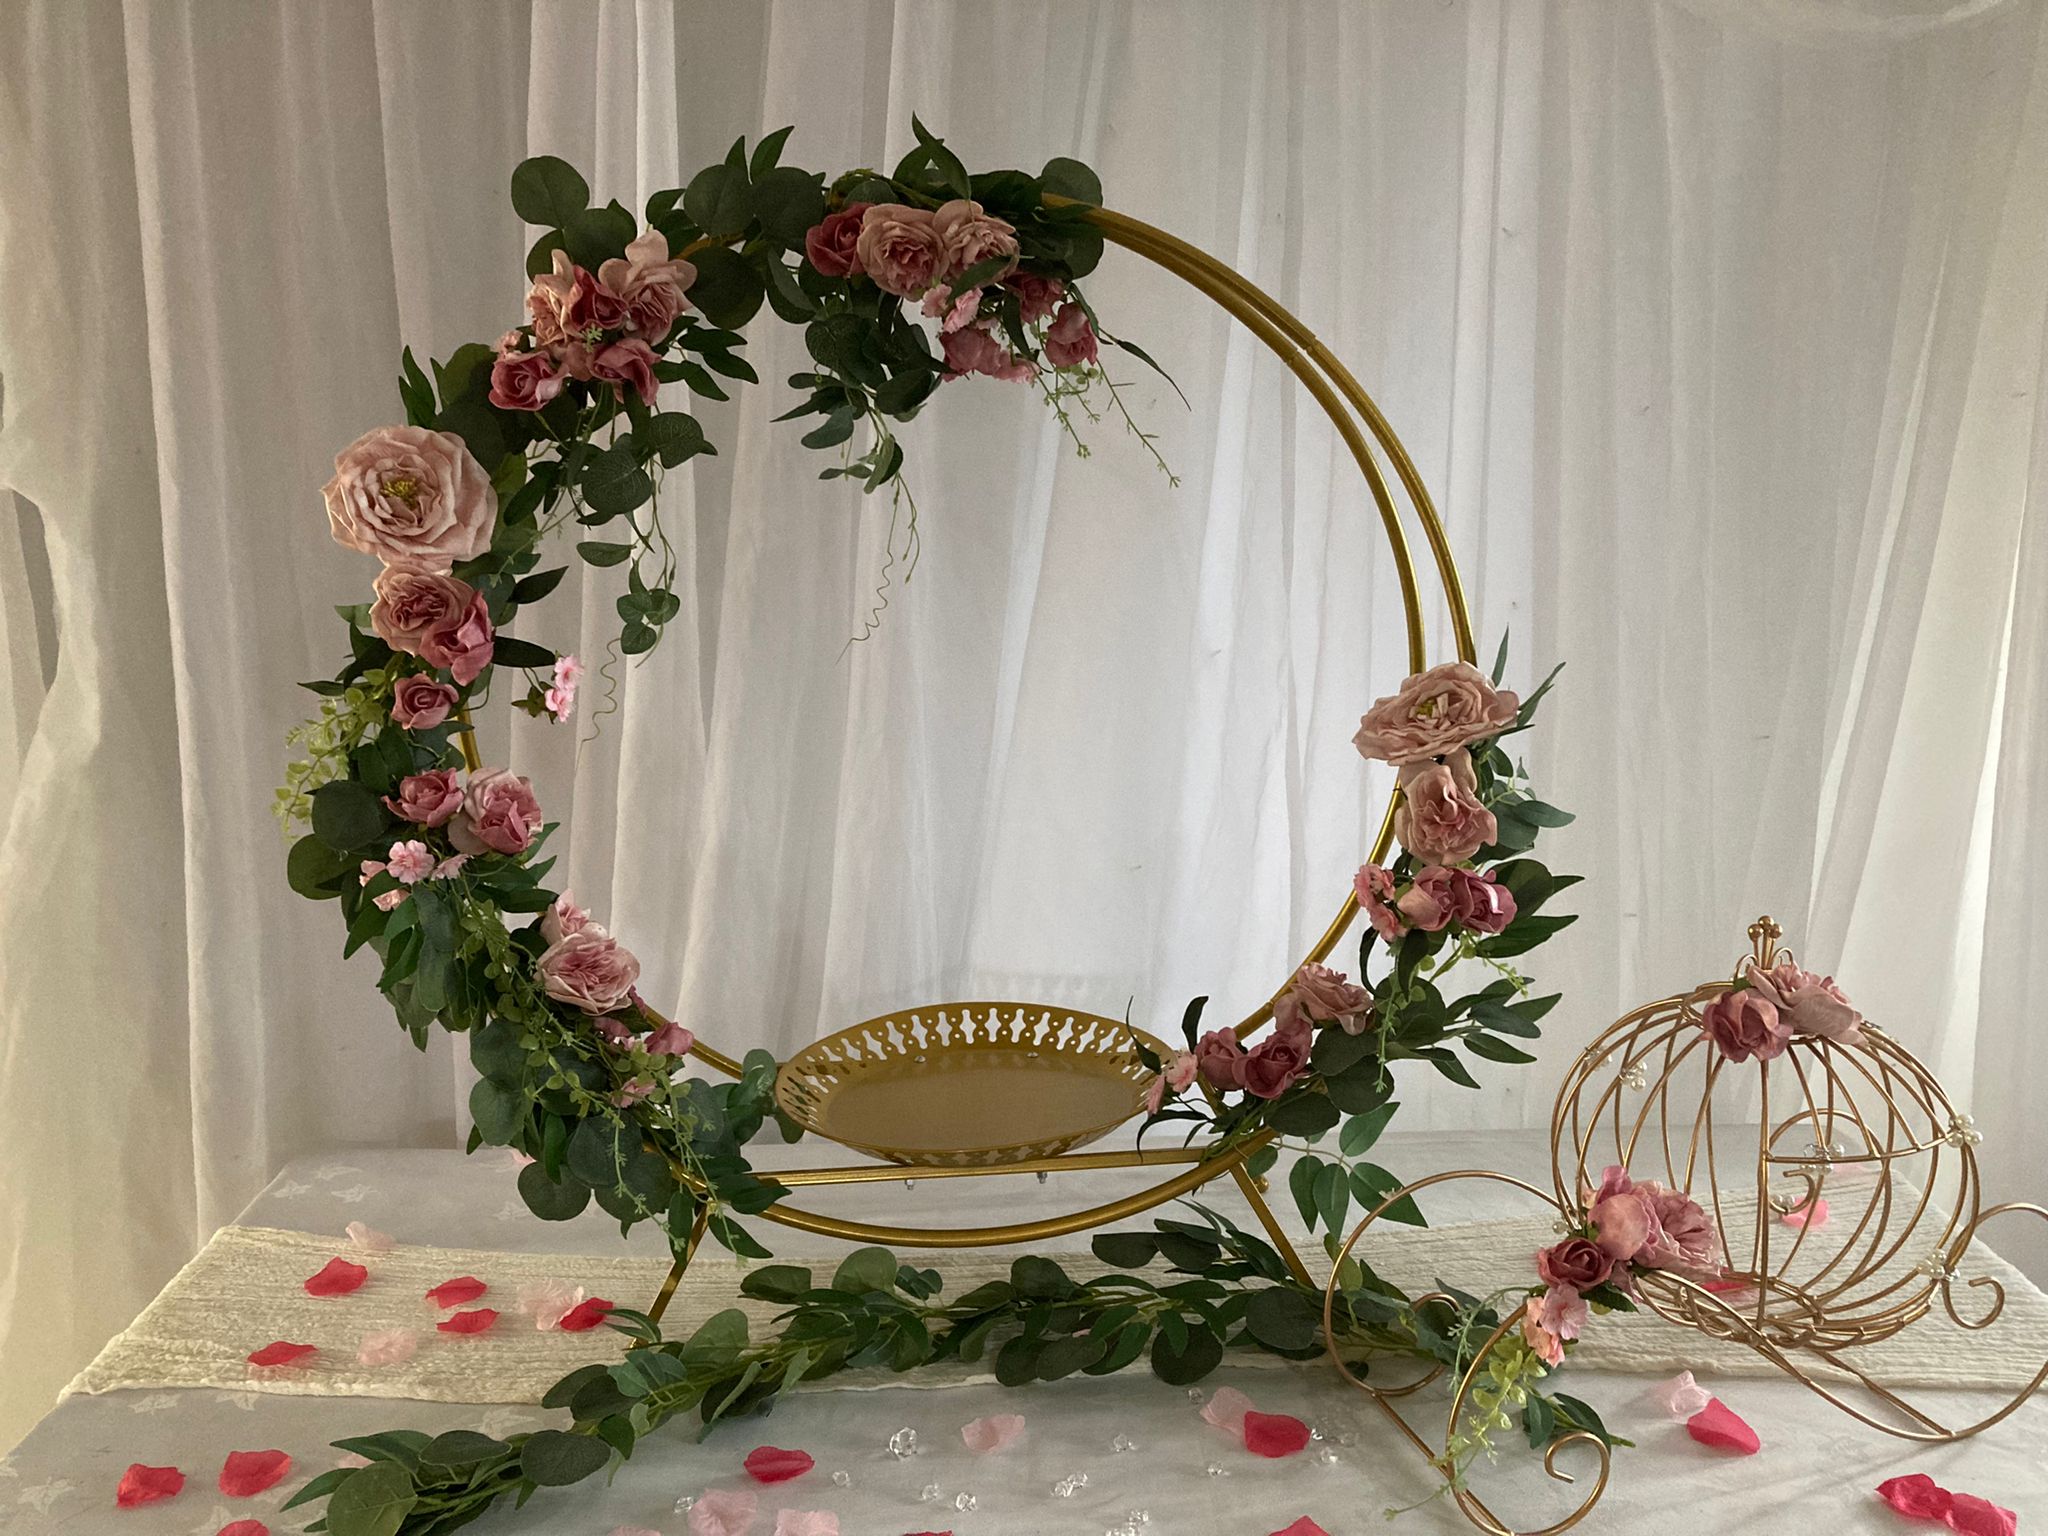 Gold hoop cake stand with pink roses around the edge and Cinderella coach at the side